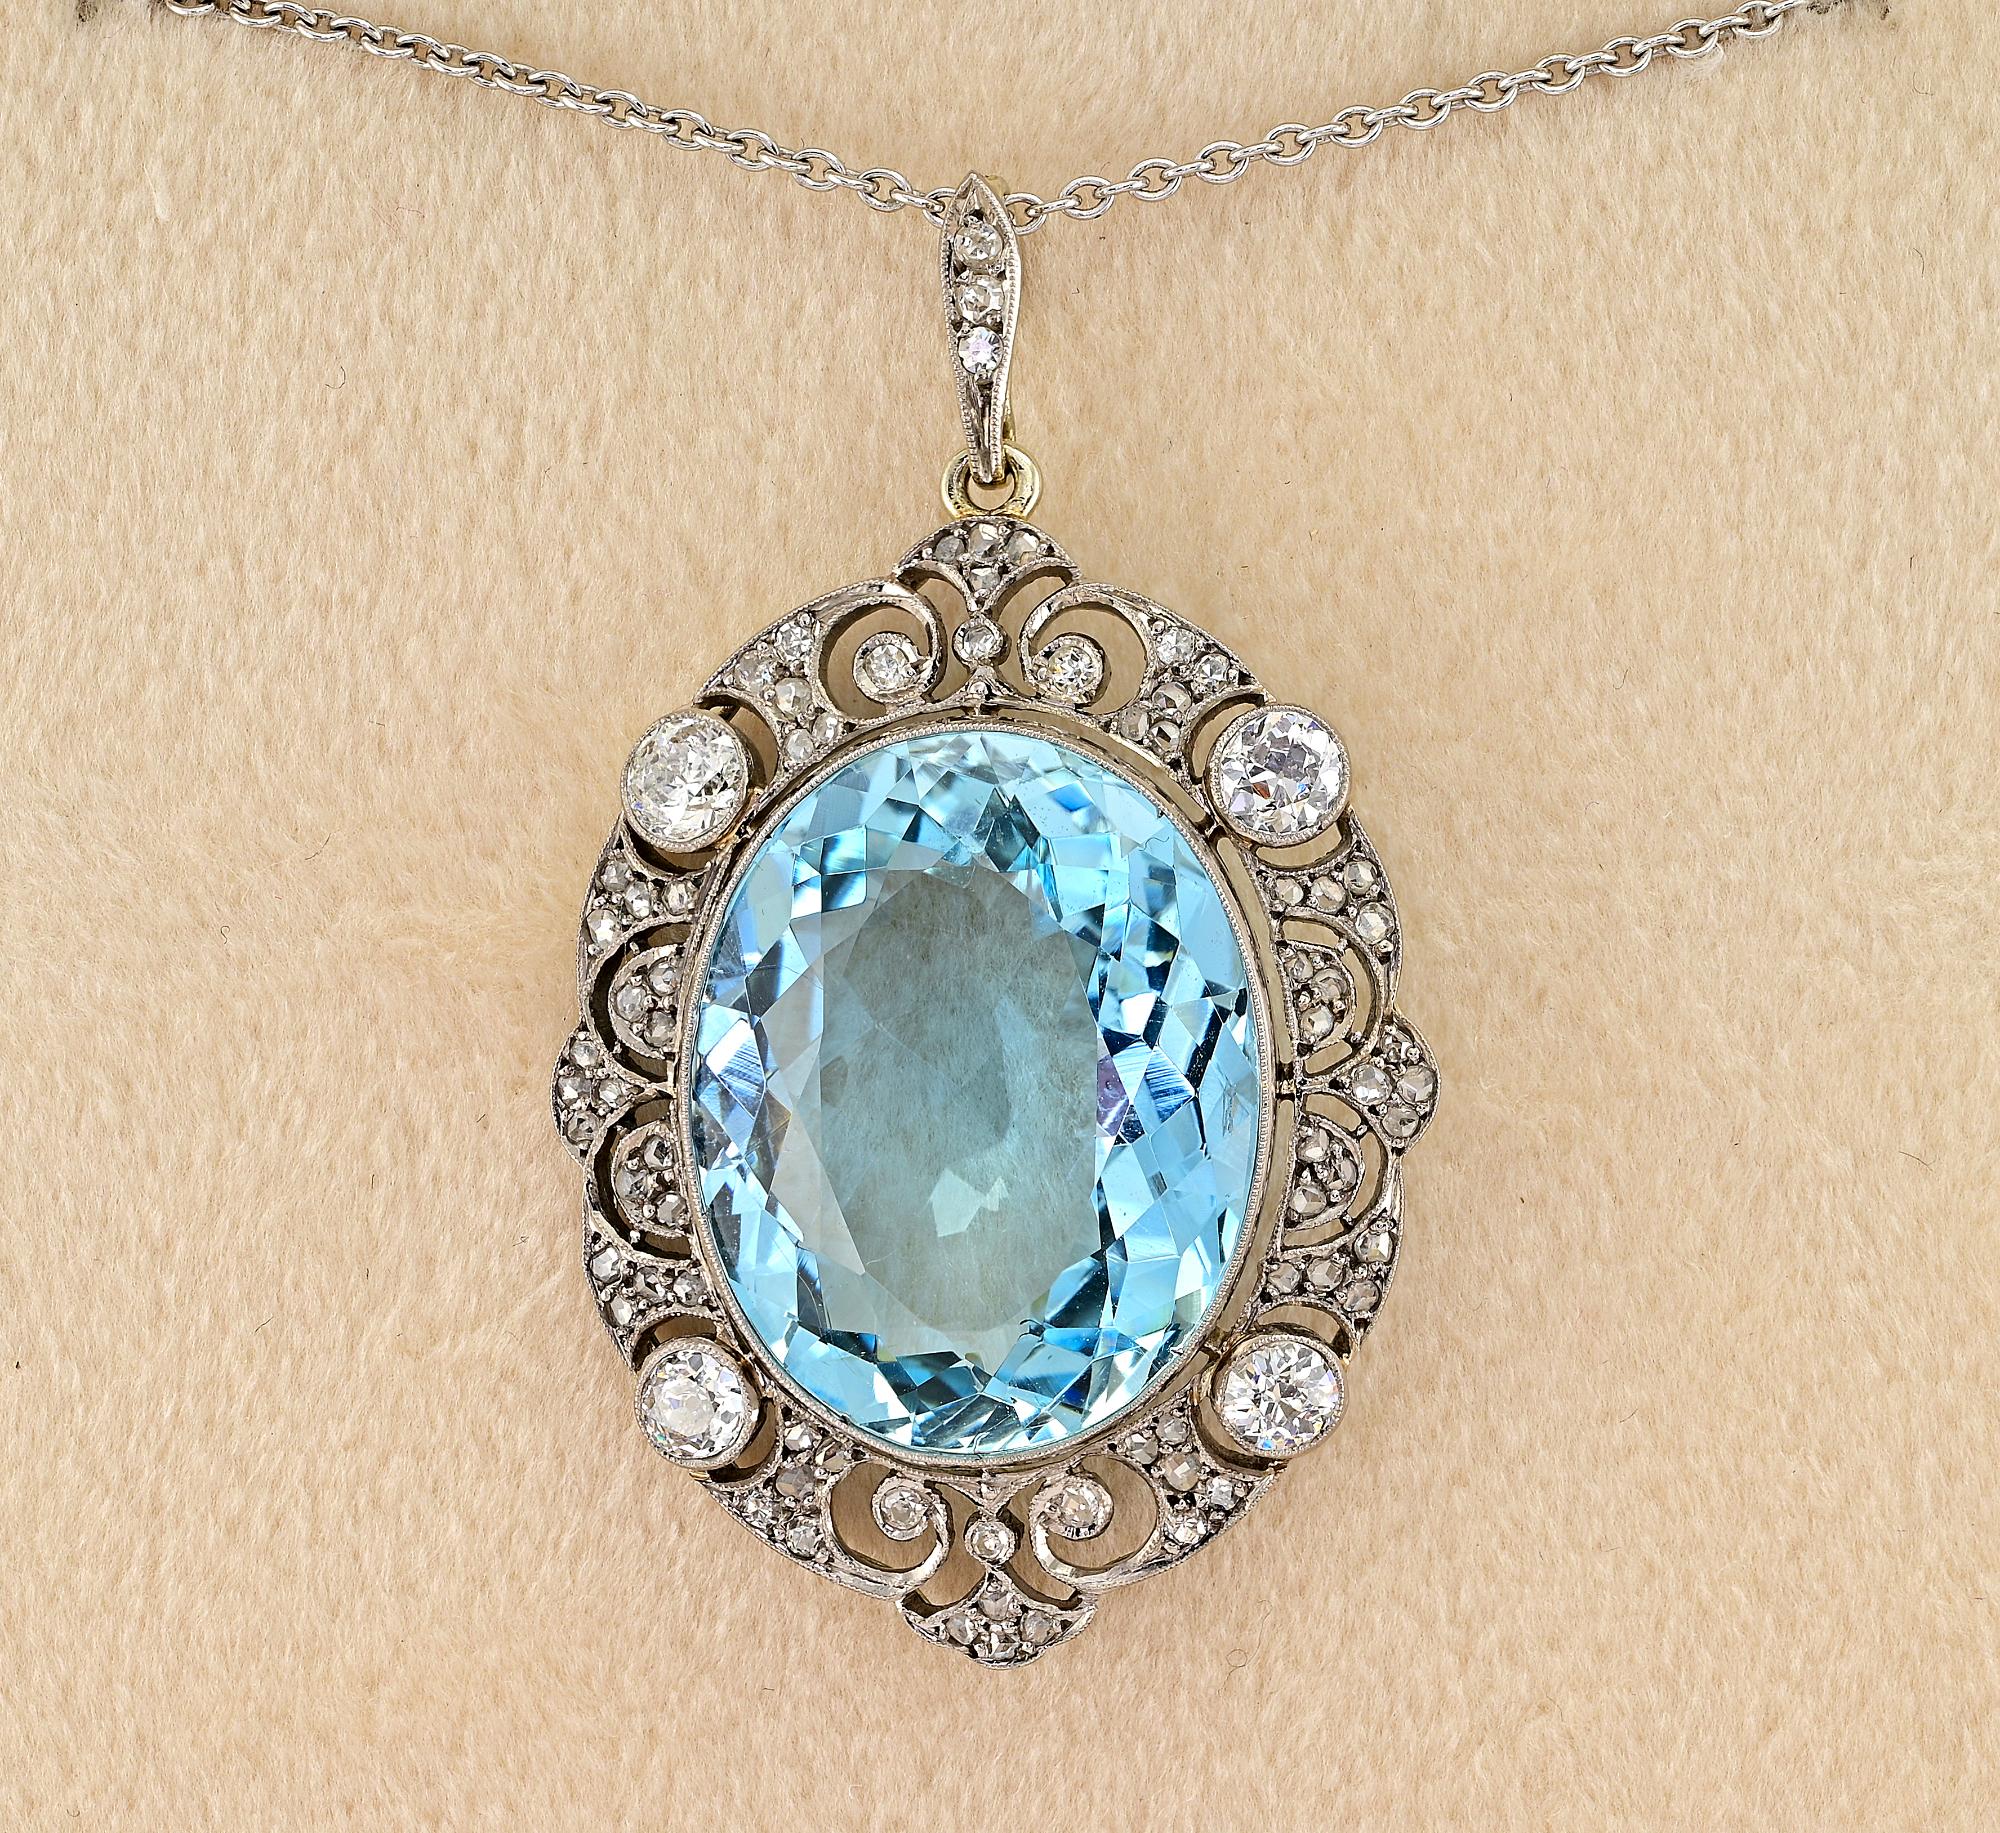 This breath taking antique pendant is Edwardian period, 1905 circa
The exquisite hand workmanship is rendered of solid Platinum and 18 KT gold little portions, crafted in a remarkable openwork design expressing grace and elegance typical of the